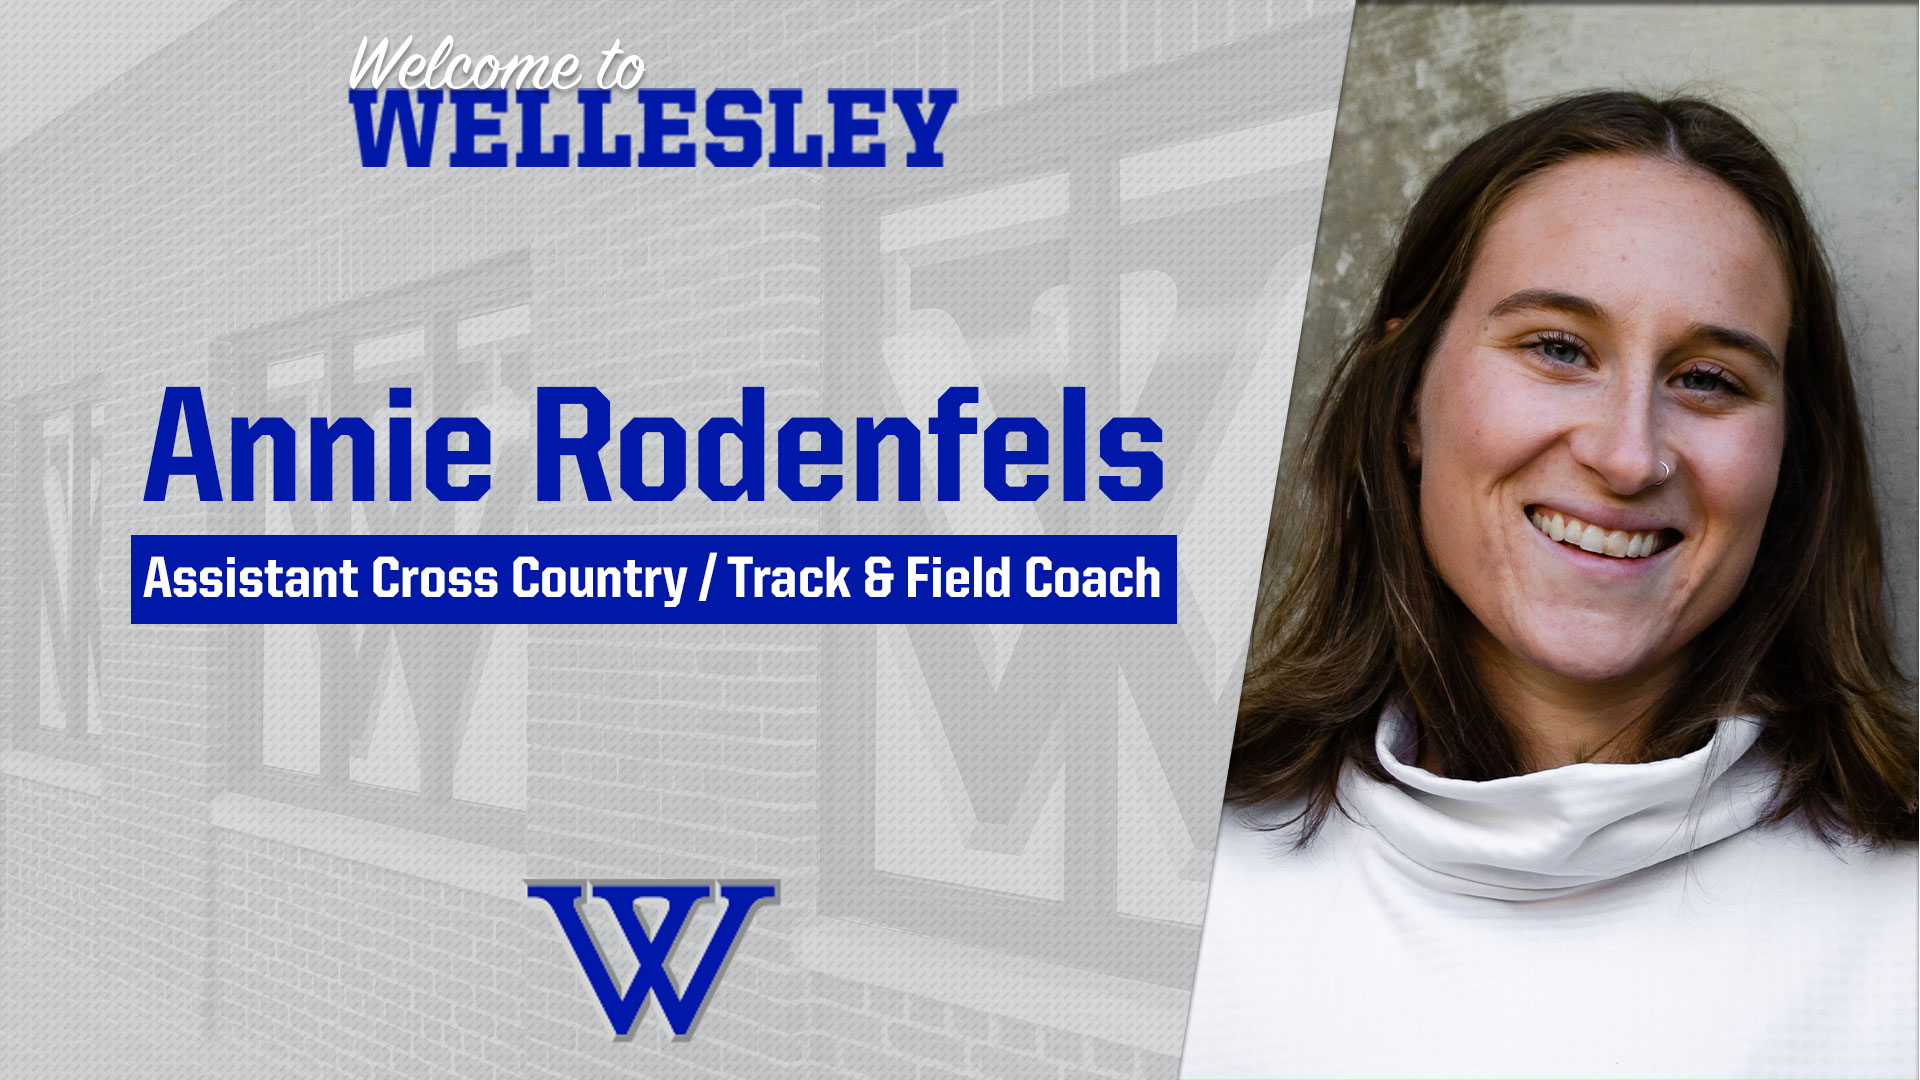 Wellesley Cross Country and Track & Field Announces the Hiring of Annie Rodenfels